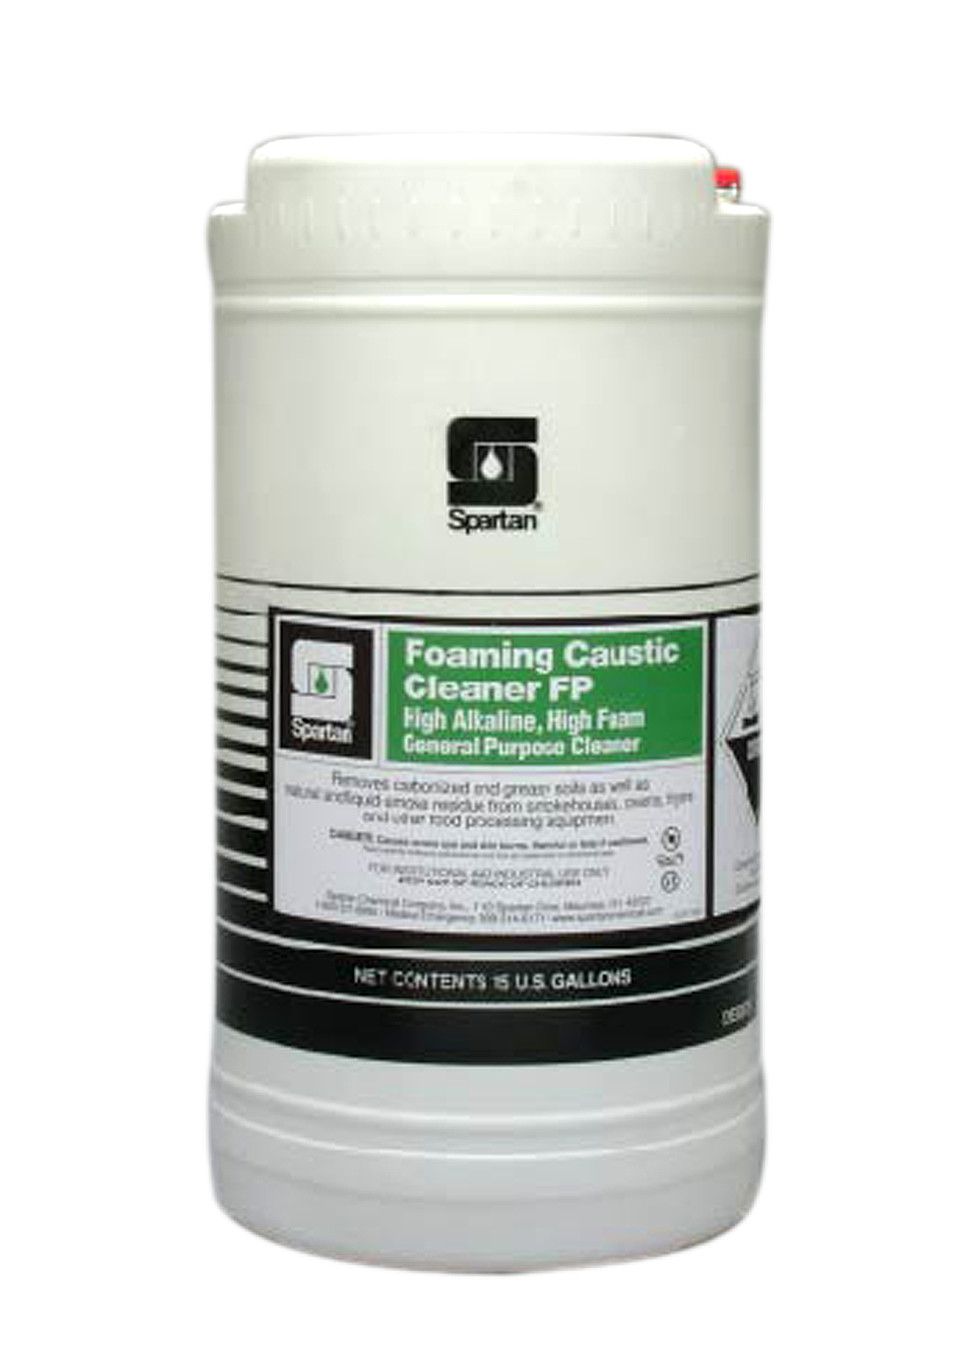 Spartan Chemical Company Foaming Caustic Cleaner FP, 15 GAL DRUM